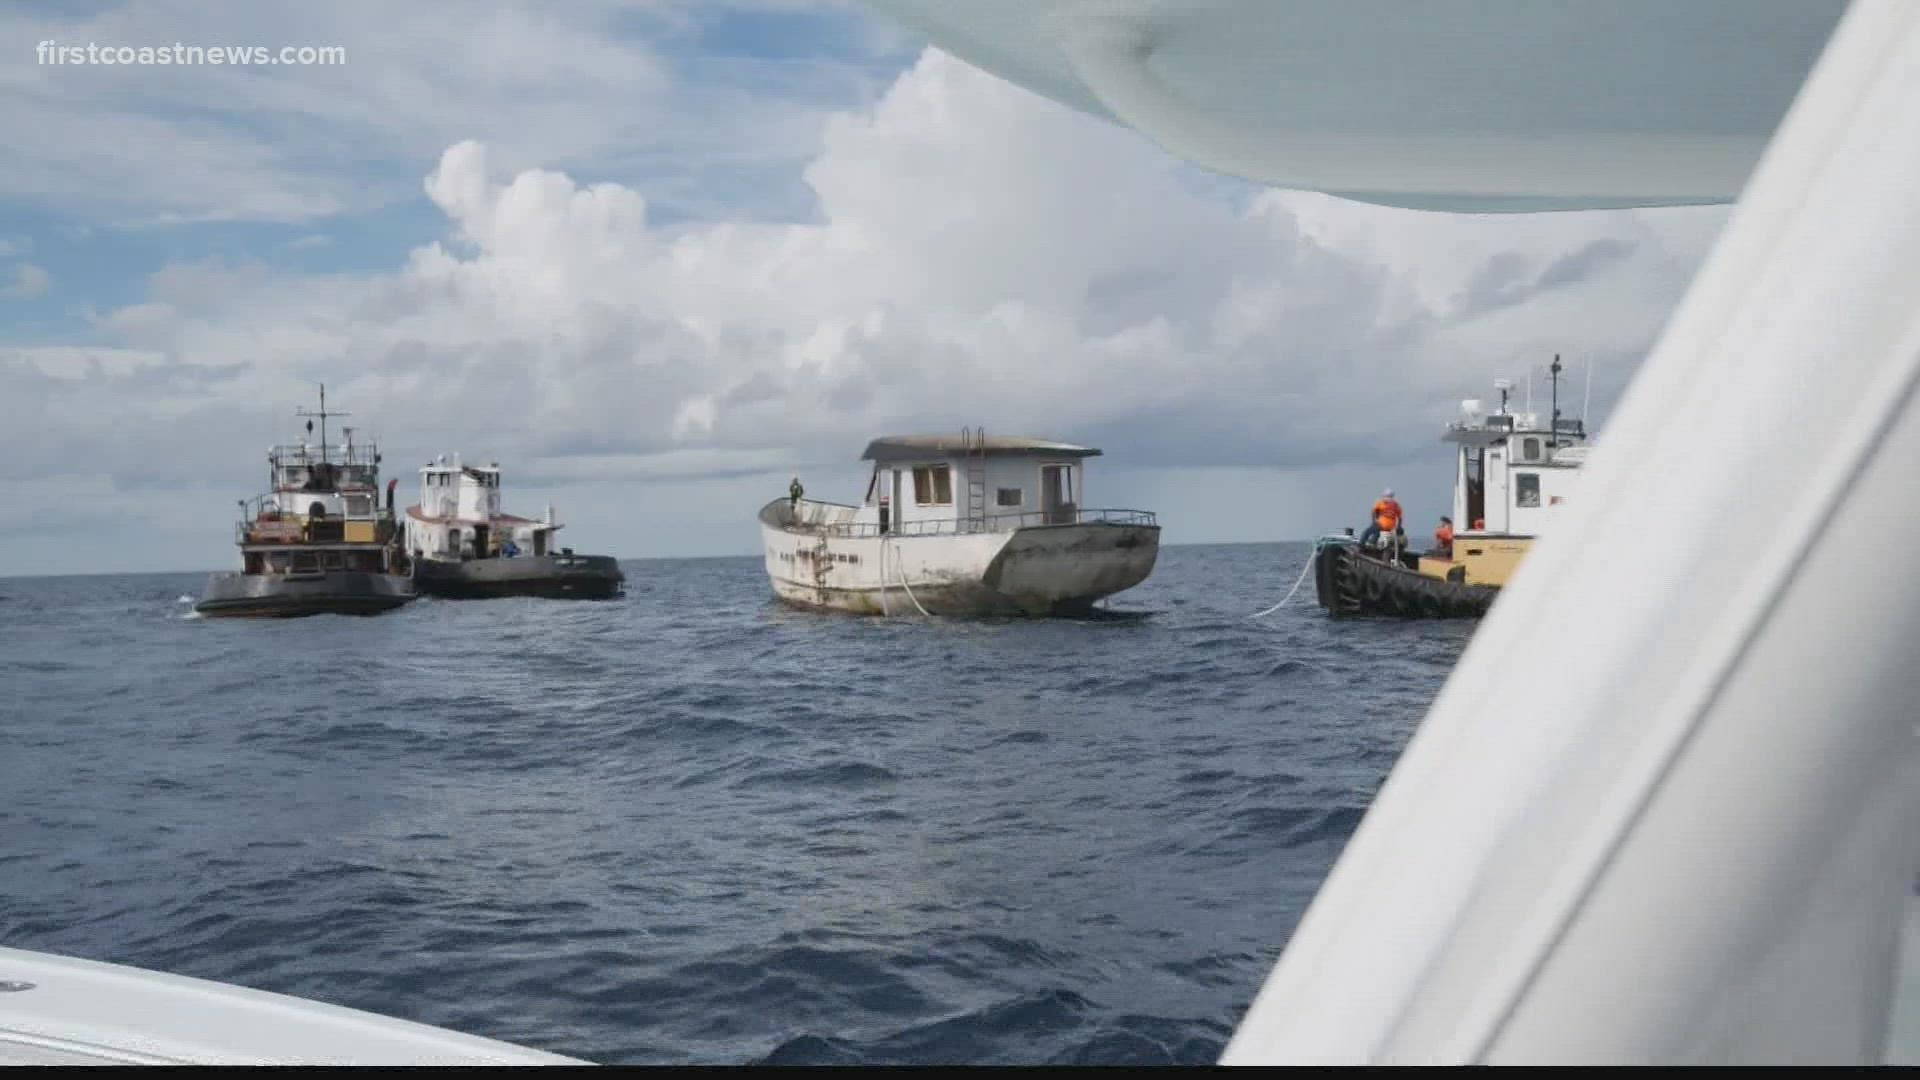 In this exclusive report, Jessica Clark takes us to – and under the water where old boats are creating new habitats.